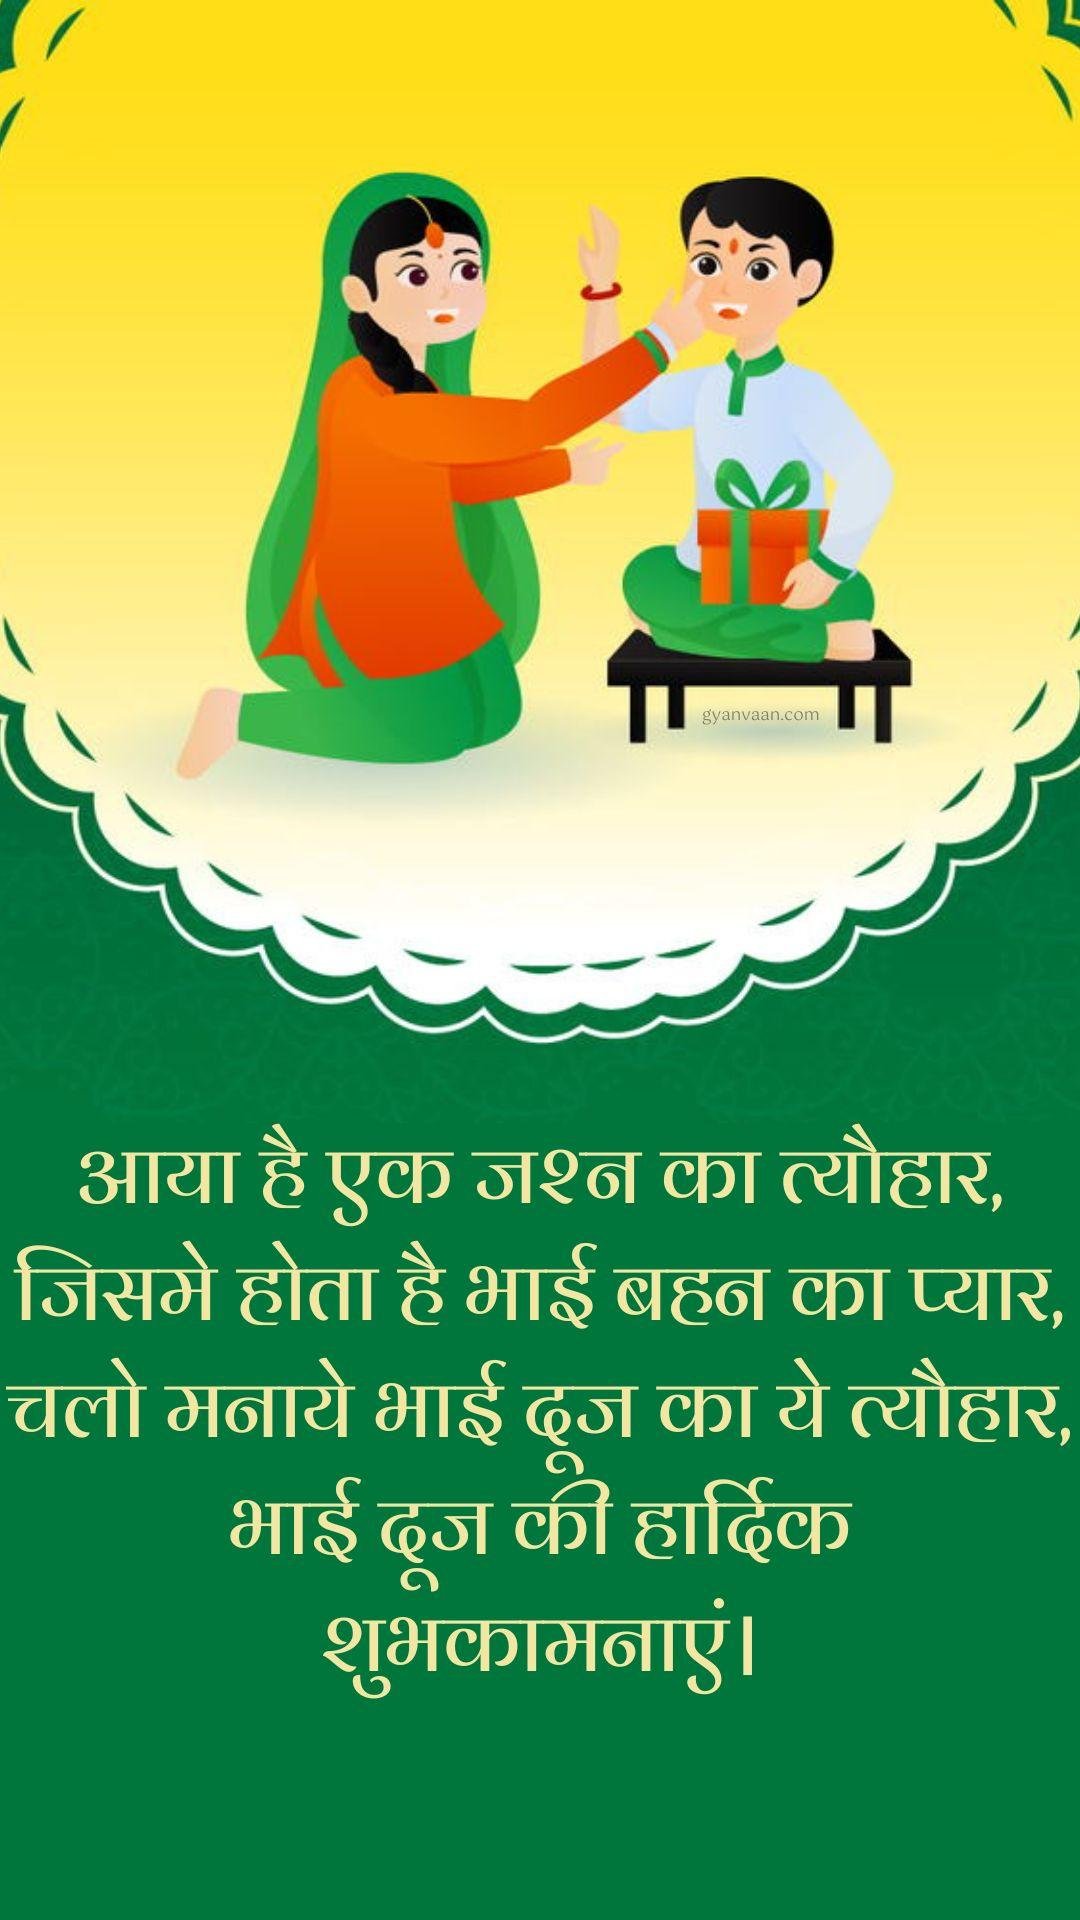 Happy Bhai Dooj Wishes In Hindi With Quotes Status Shubhkamnaye And Messages For Mobile 13 - Bhai Dooj Wishes In Hindi